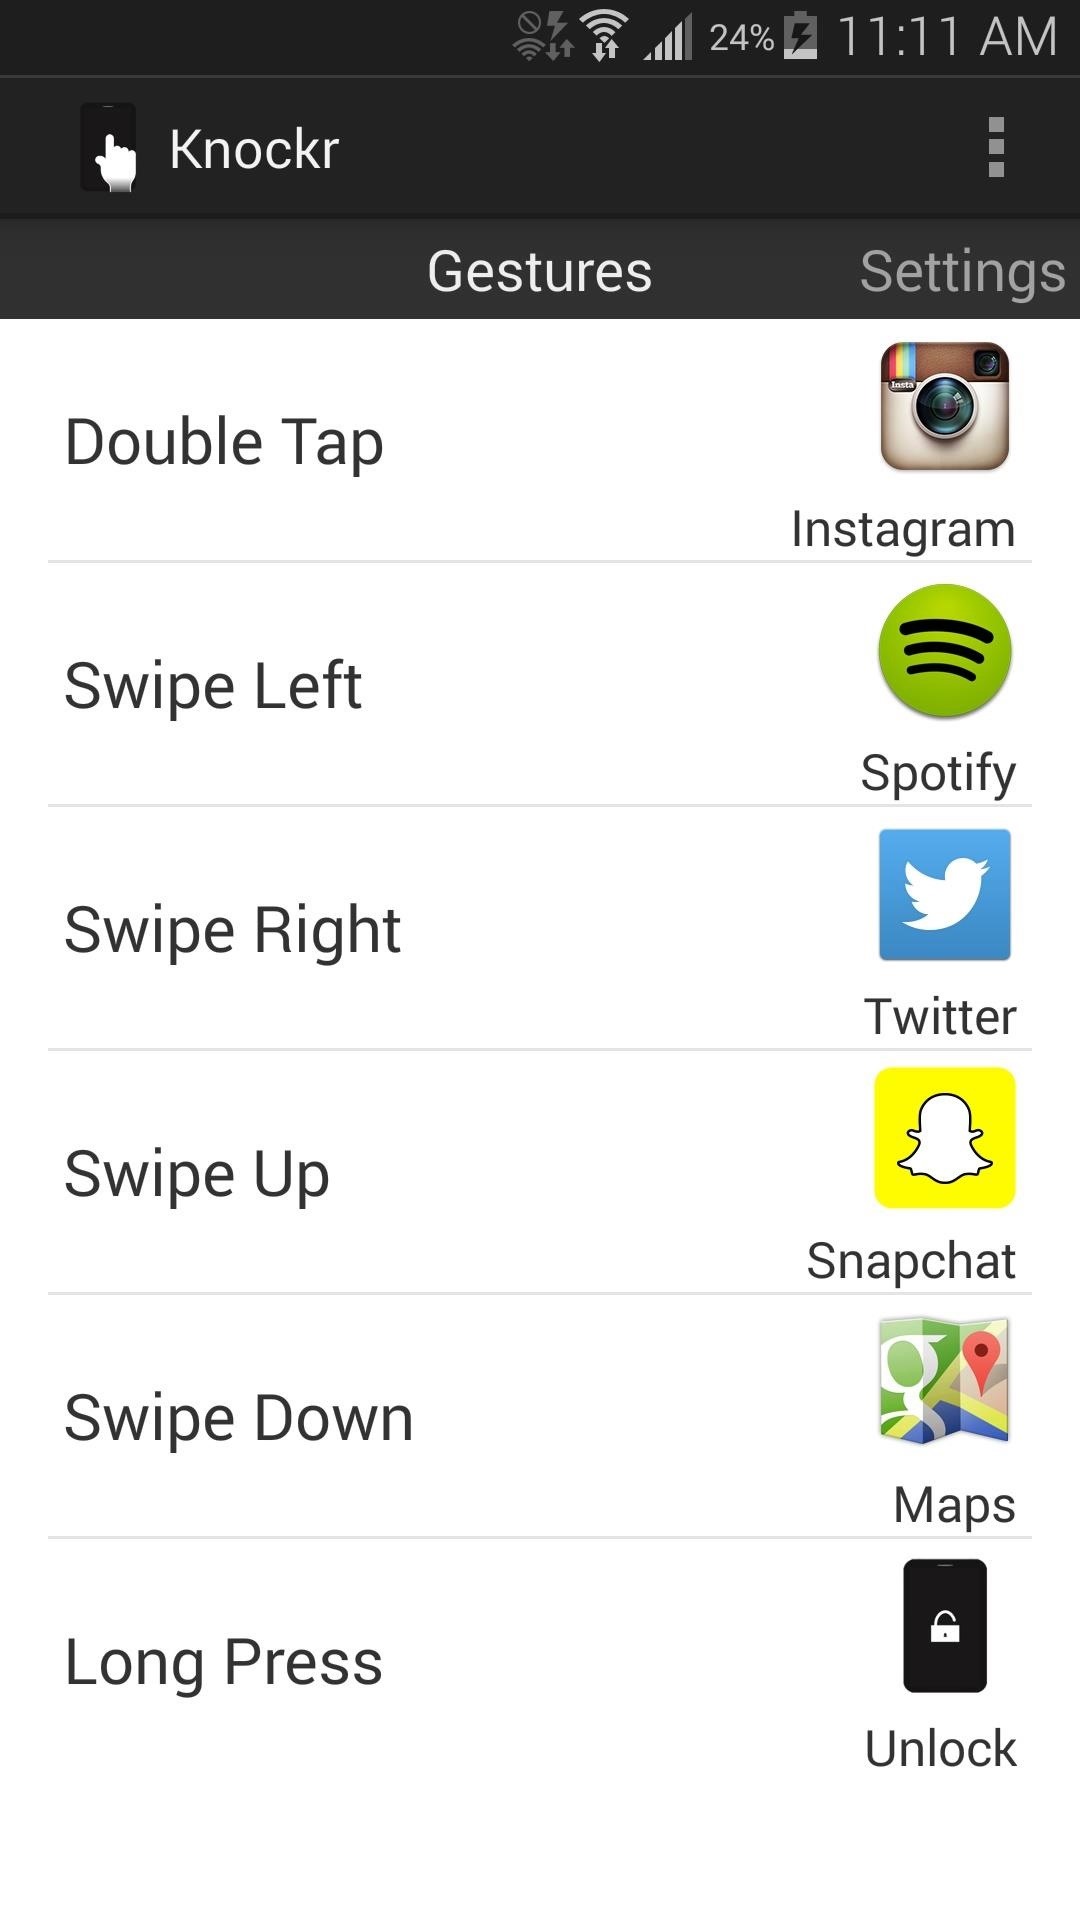 How to Control Your Samsung Galaxy S5 Using Gestures When the Screen Is Off